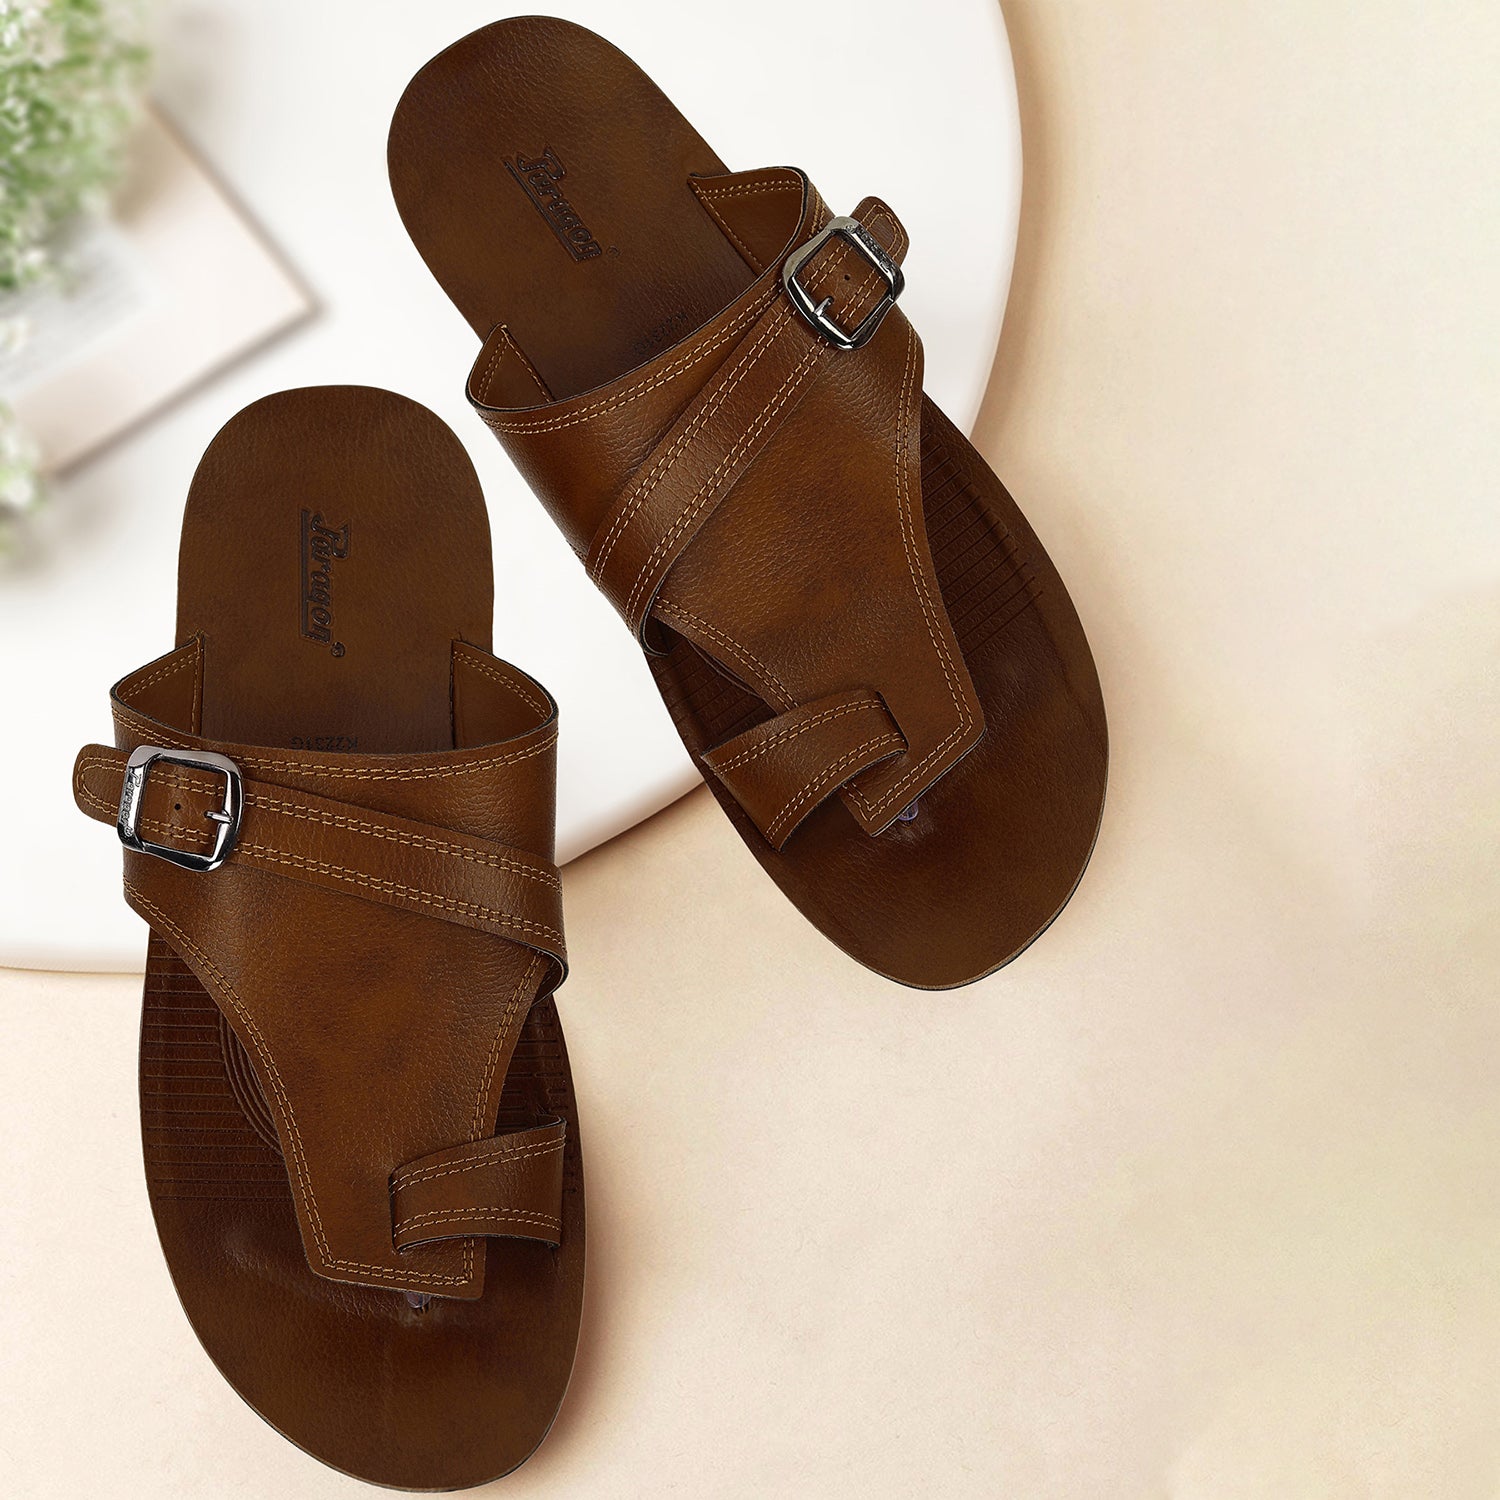 Paragon PUK2231G Men Stylish Sandals | Comfortable Sandals for Daily Outdoor Use | Casual Formal Sandals with Cushioned Soles